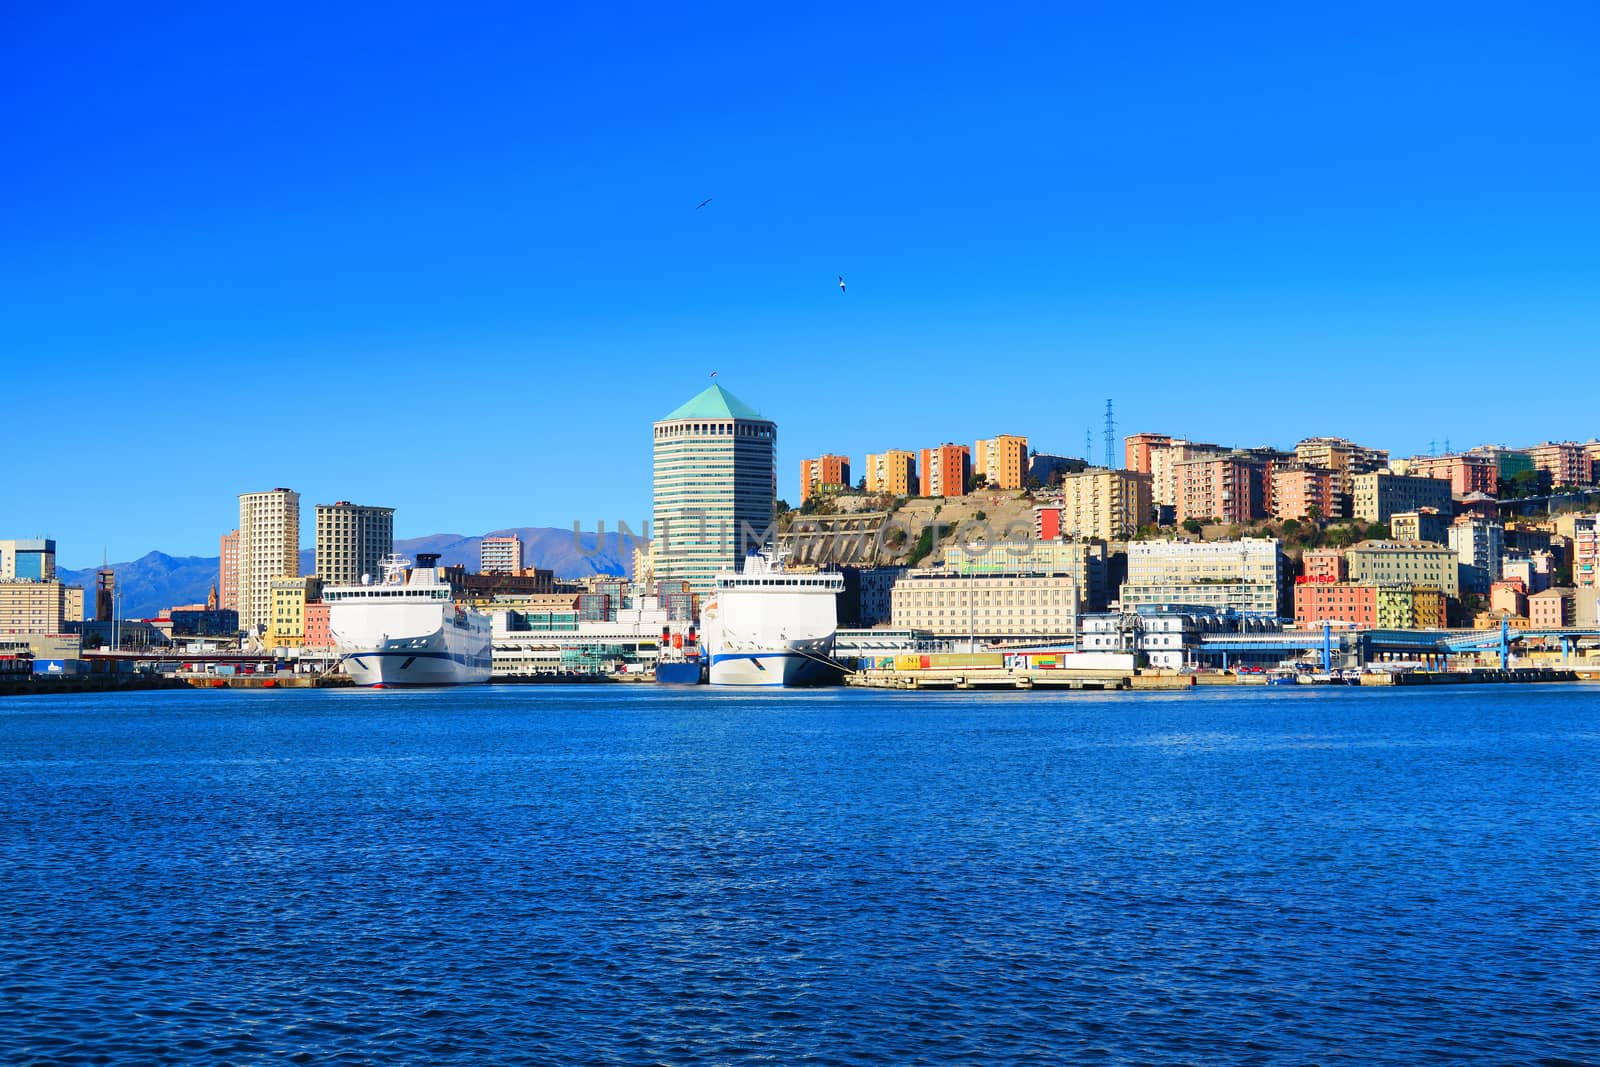 View of Genoa port. It is clearly visible the famous "Matitone", an octagonal skyscraper 109 meters high.